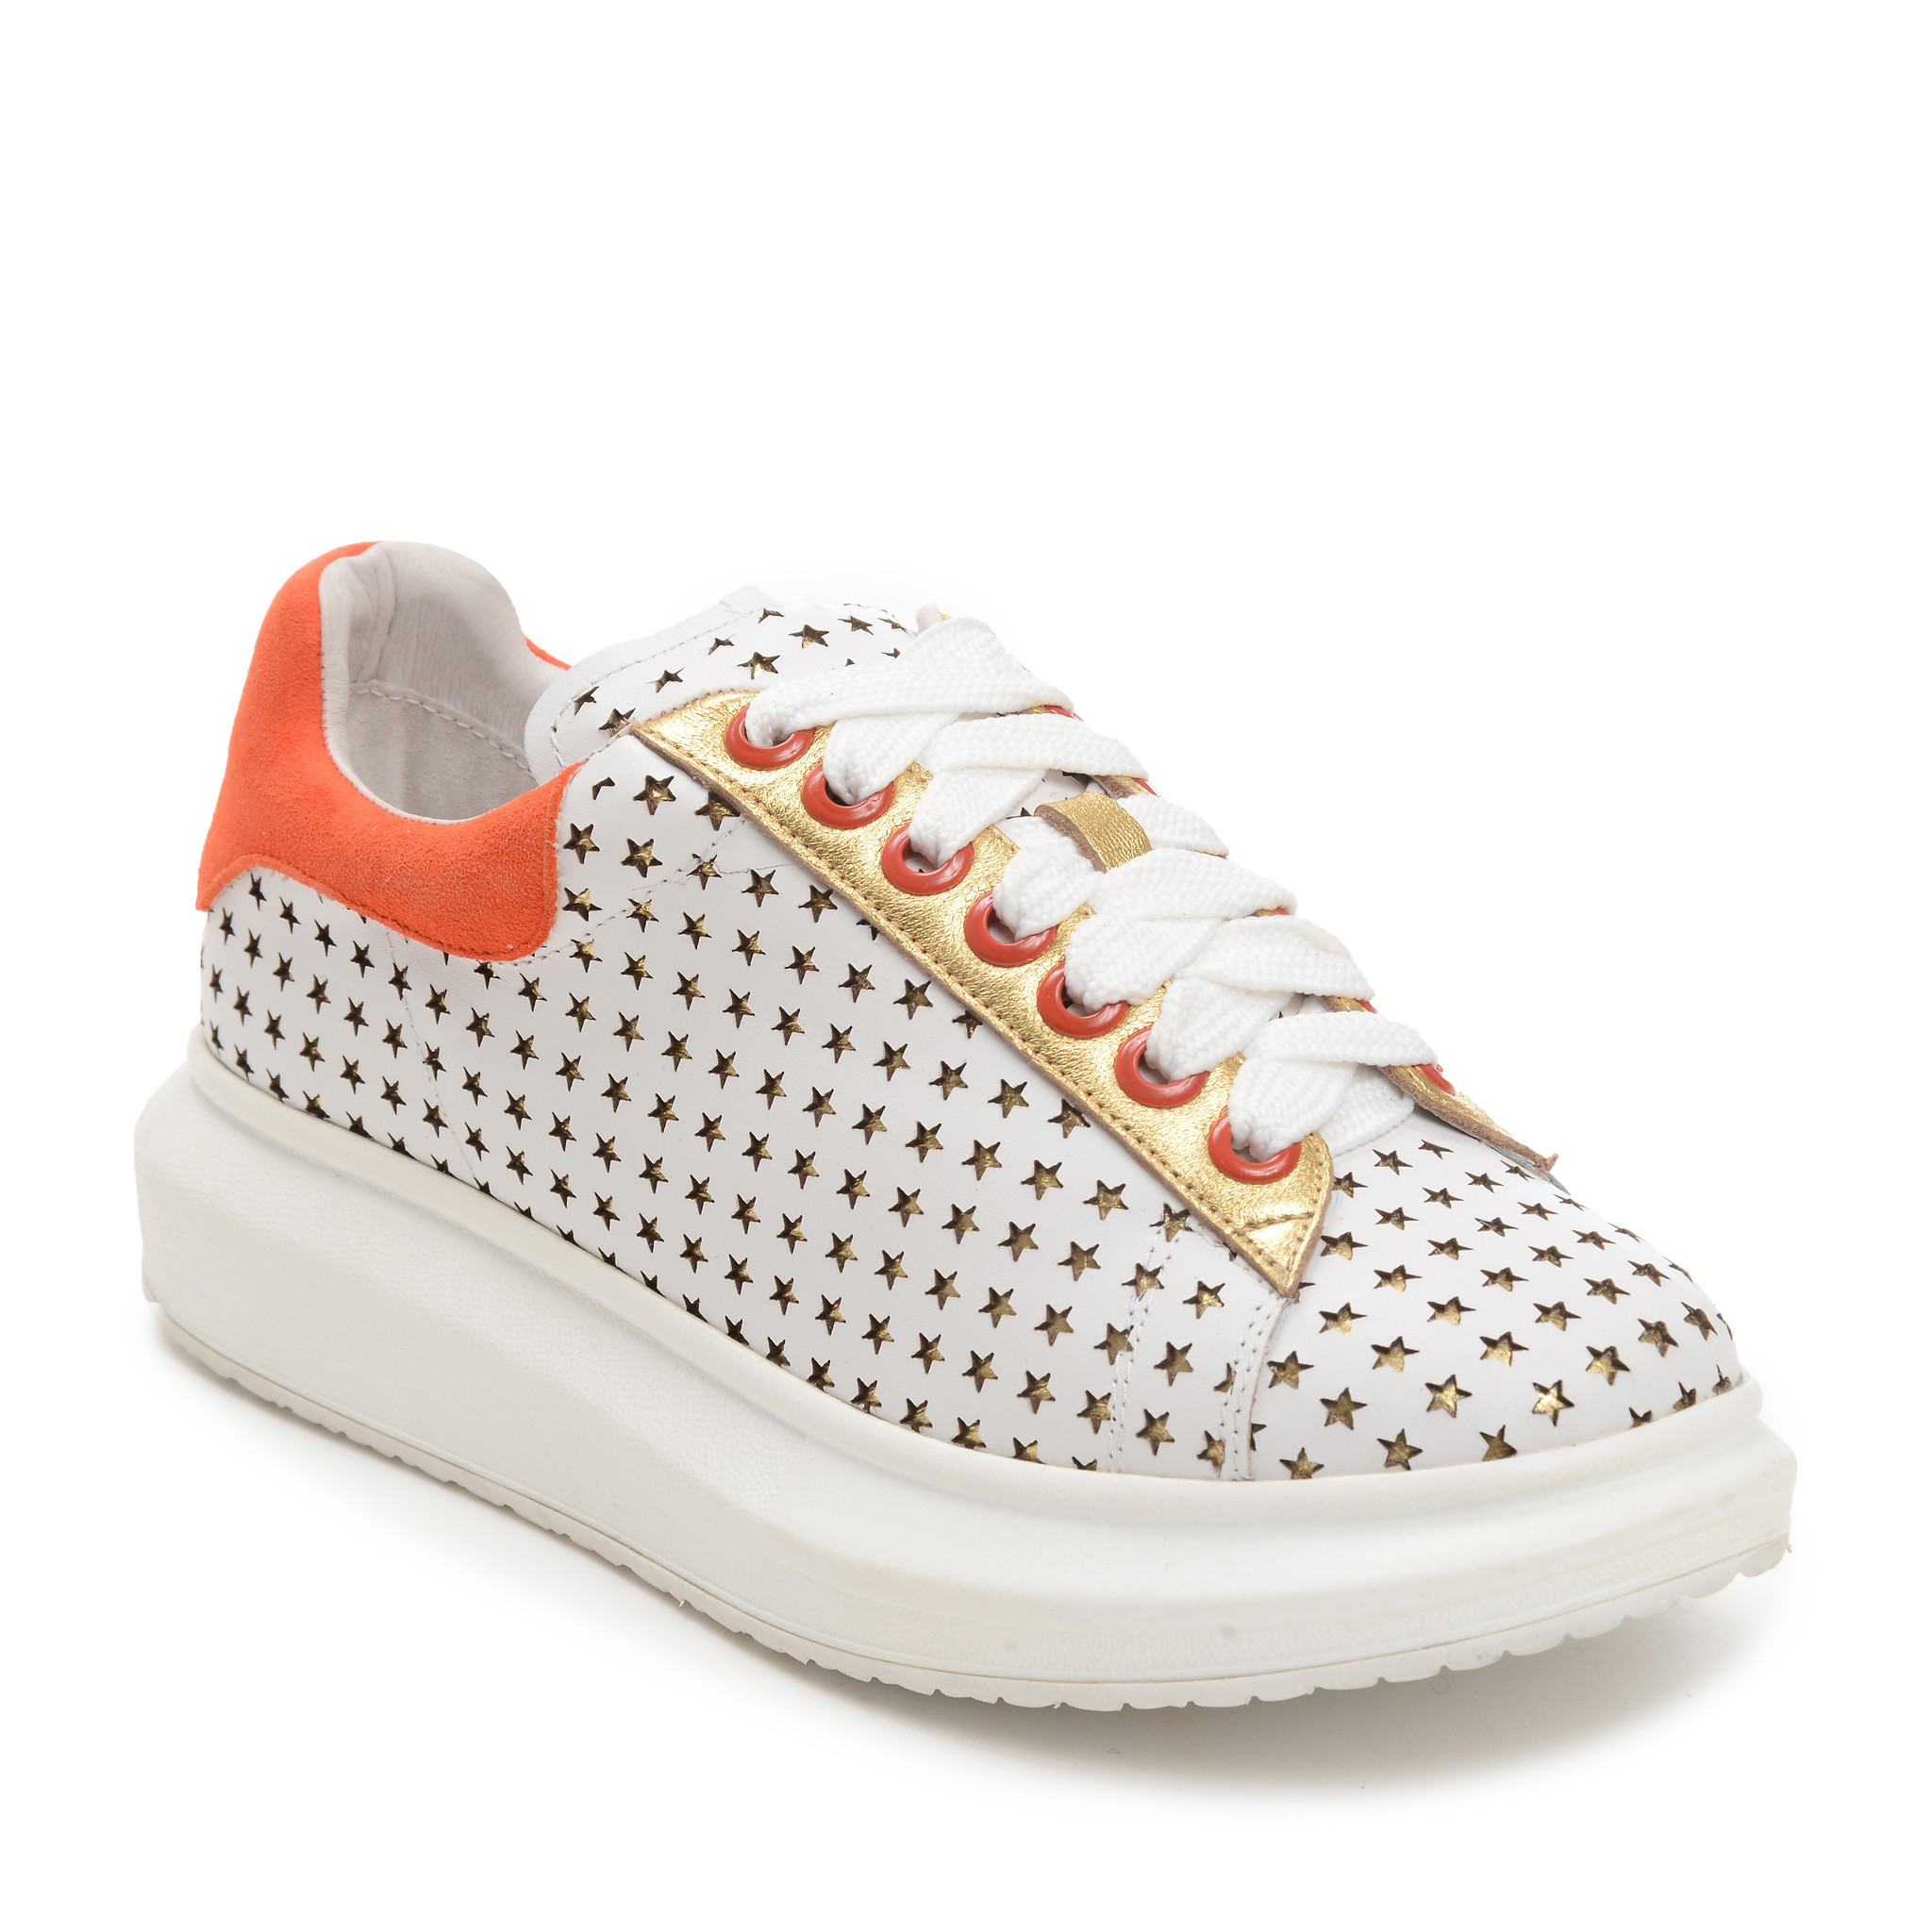 Hollie Watman’s perforated white and orange leather sneakers.